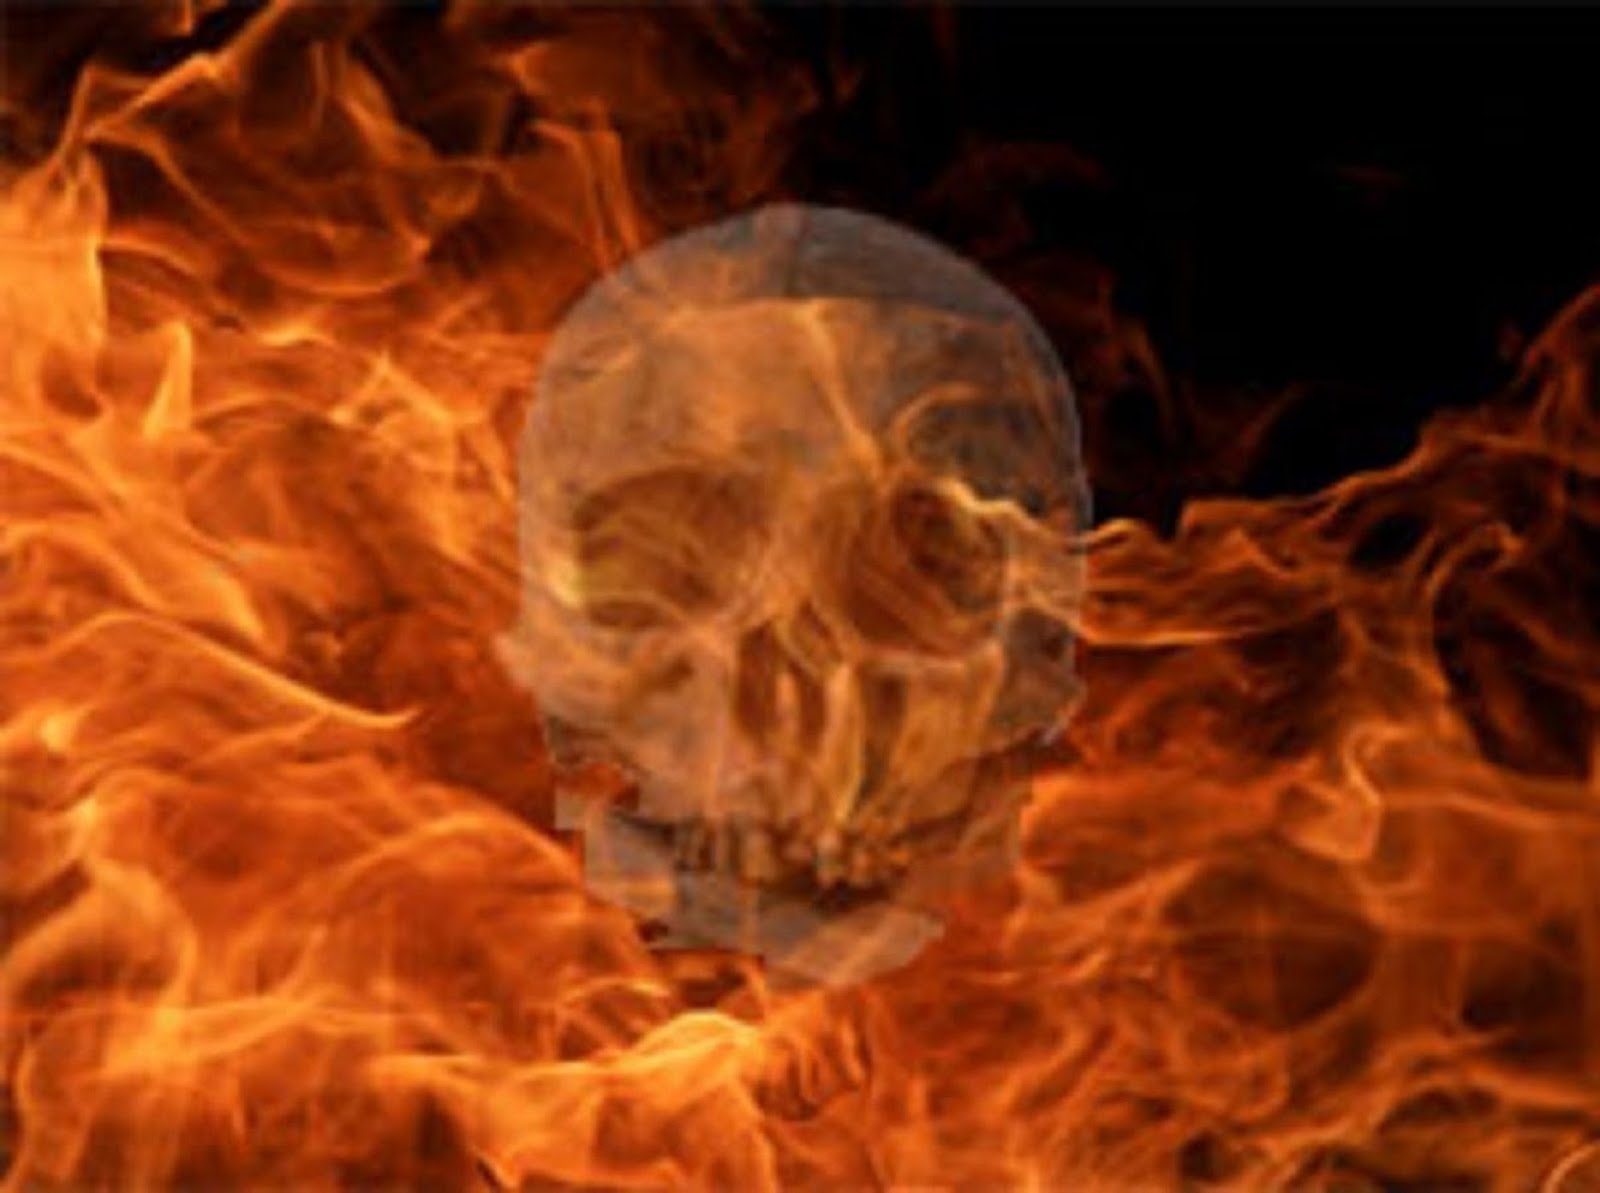 HUMAN SKULL IN THE FIRES OF HELL